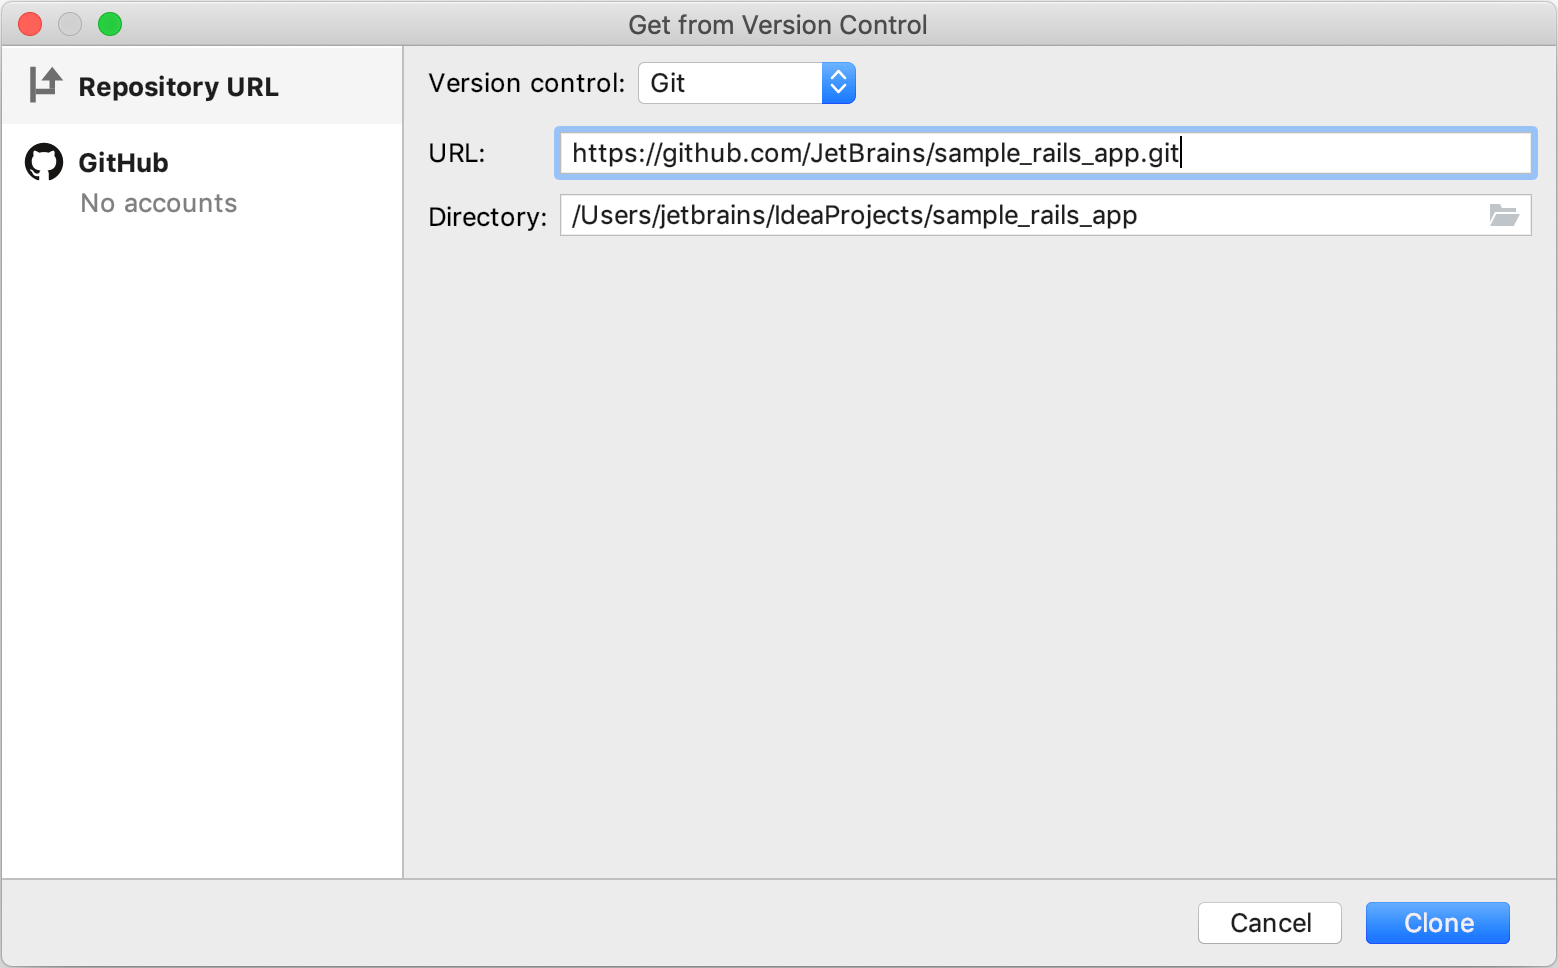 Get from Version Control dialog